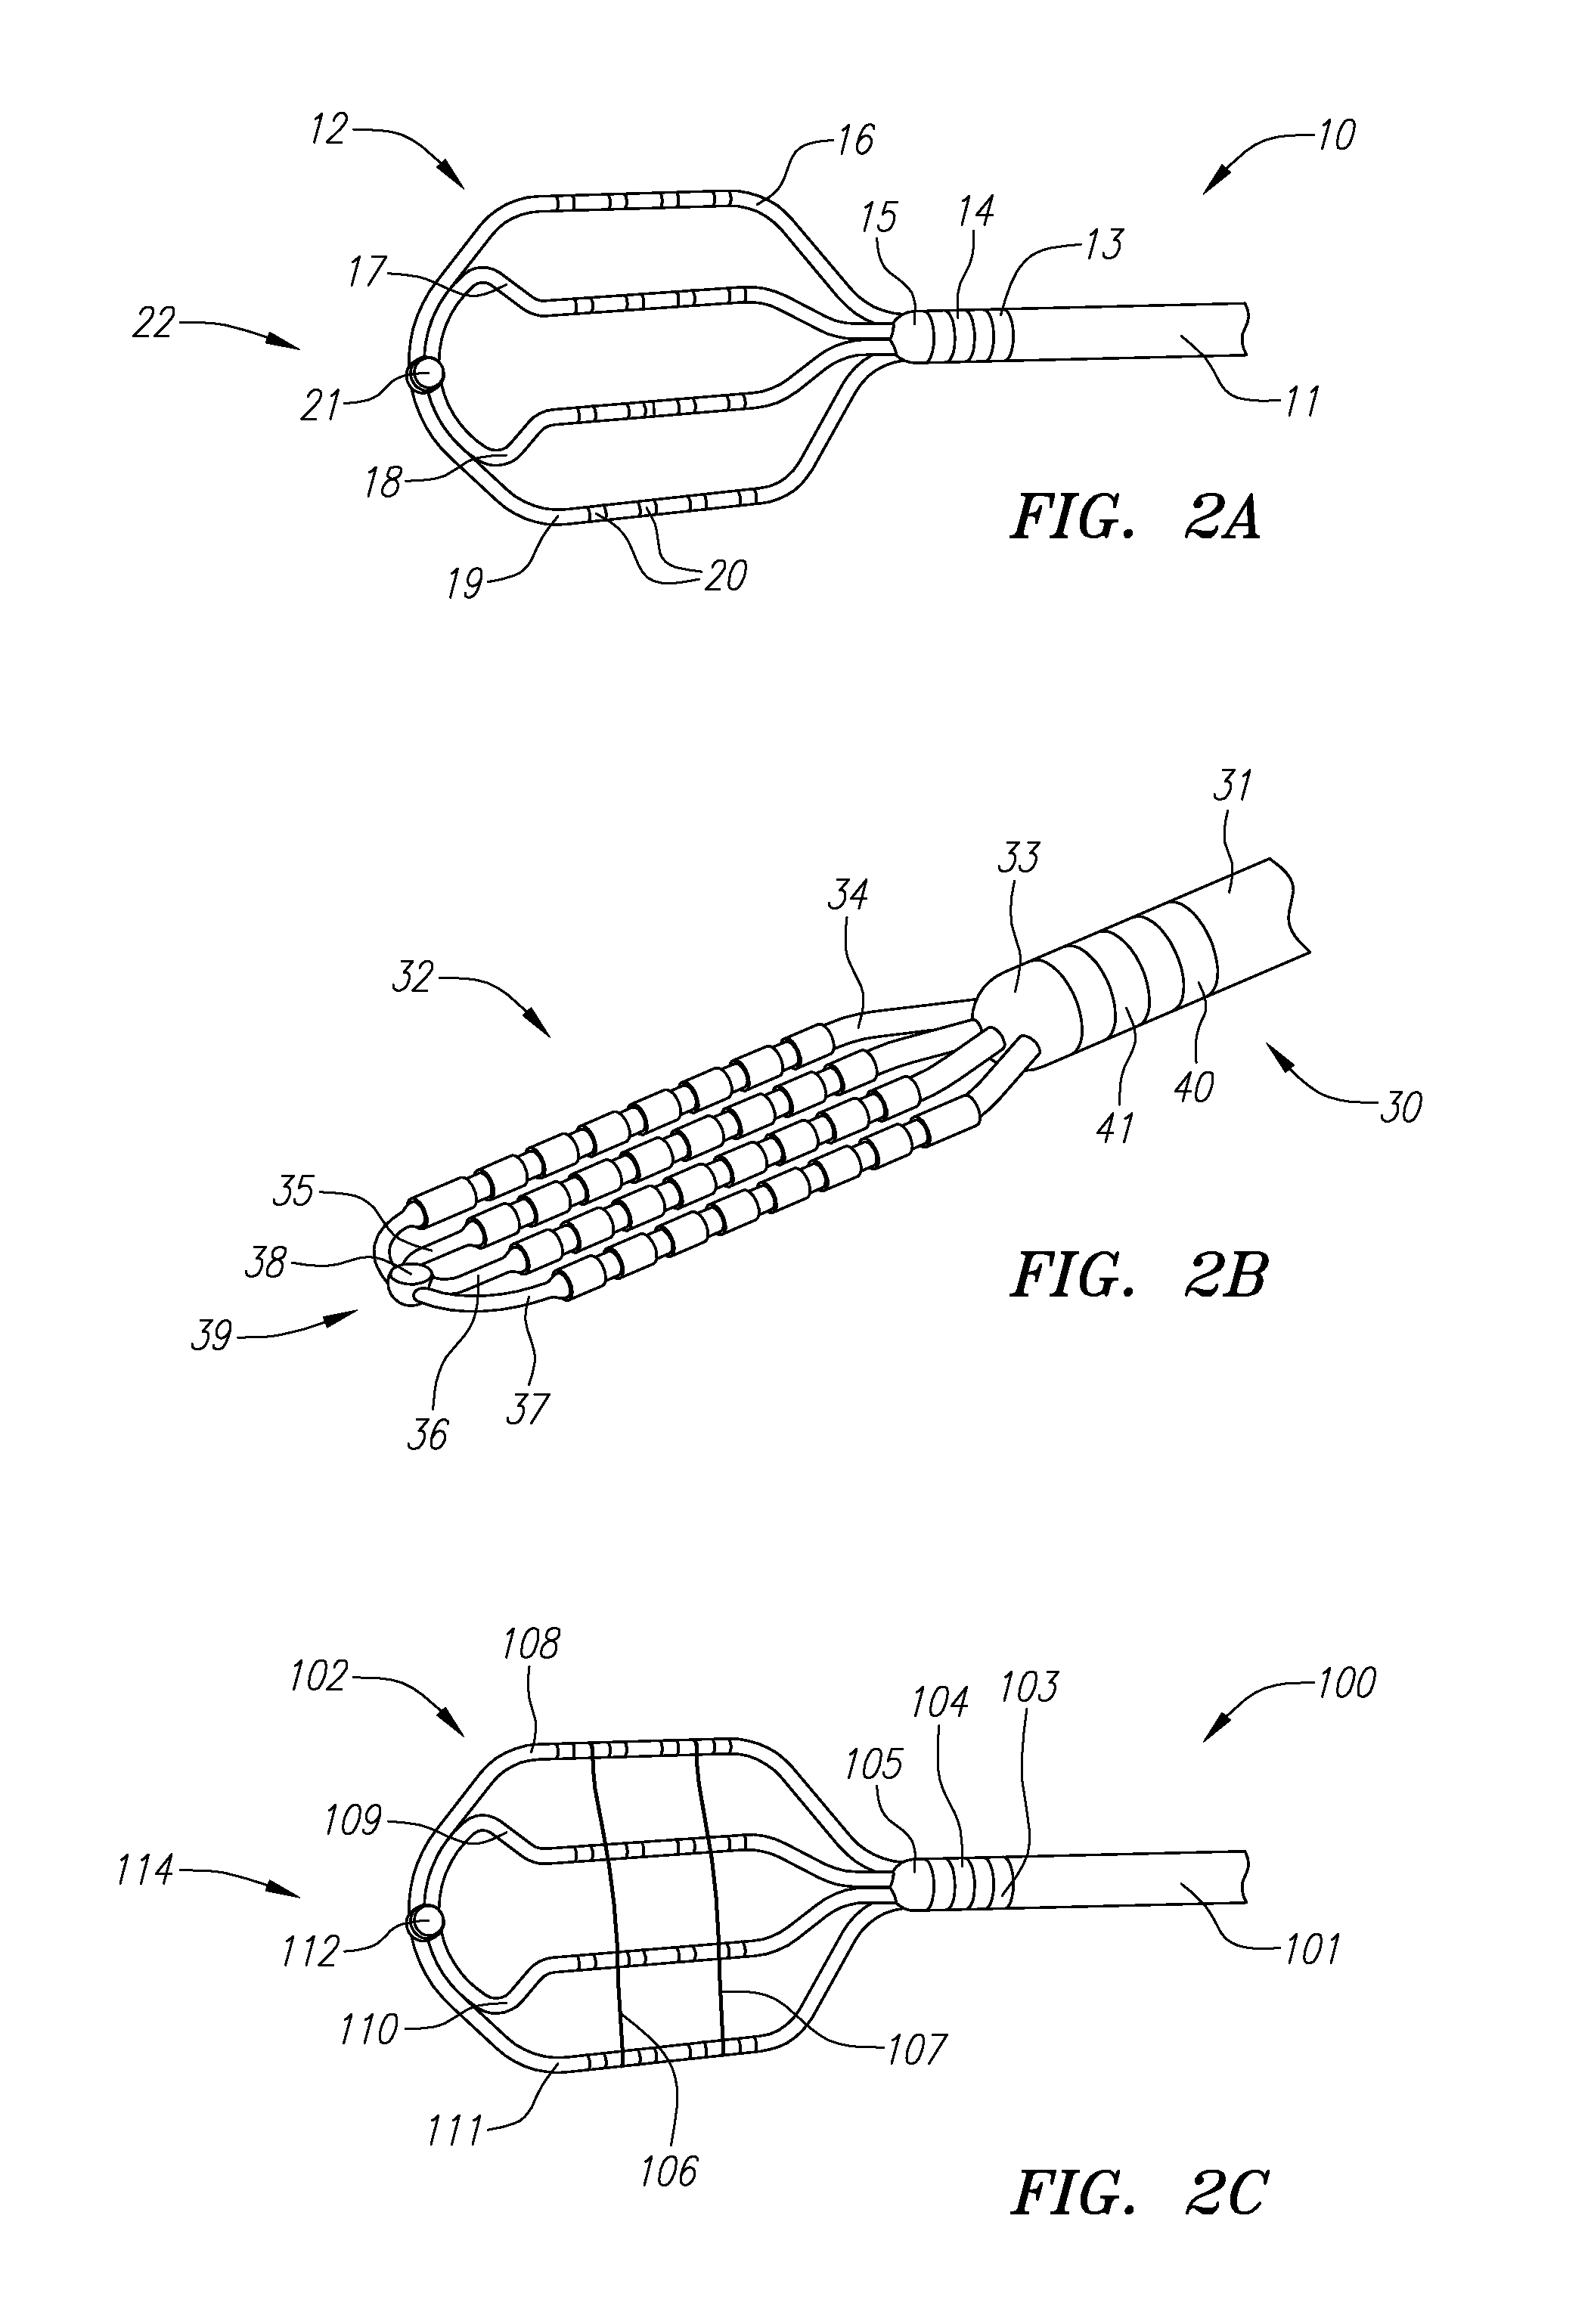 System and method for local electrophysiological characterization of cardiac substrate using multi-electrode catheters